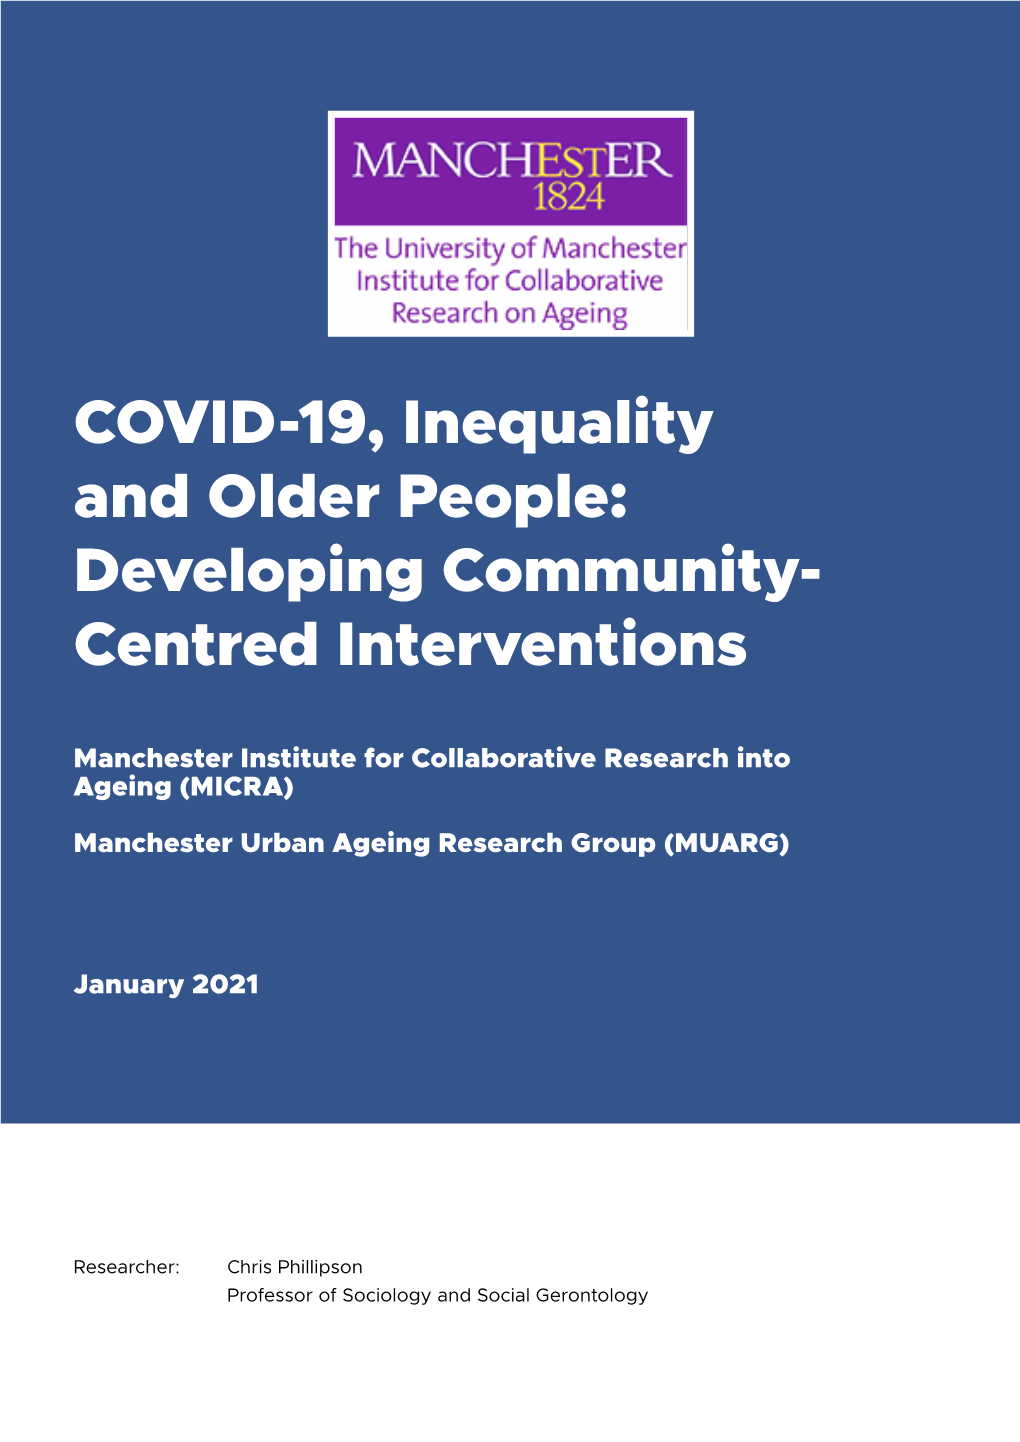 COVID-19, Inequality and Older People: Developing Community- Centred Interventions